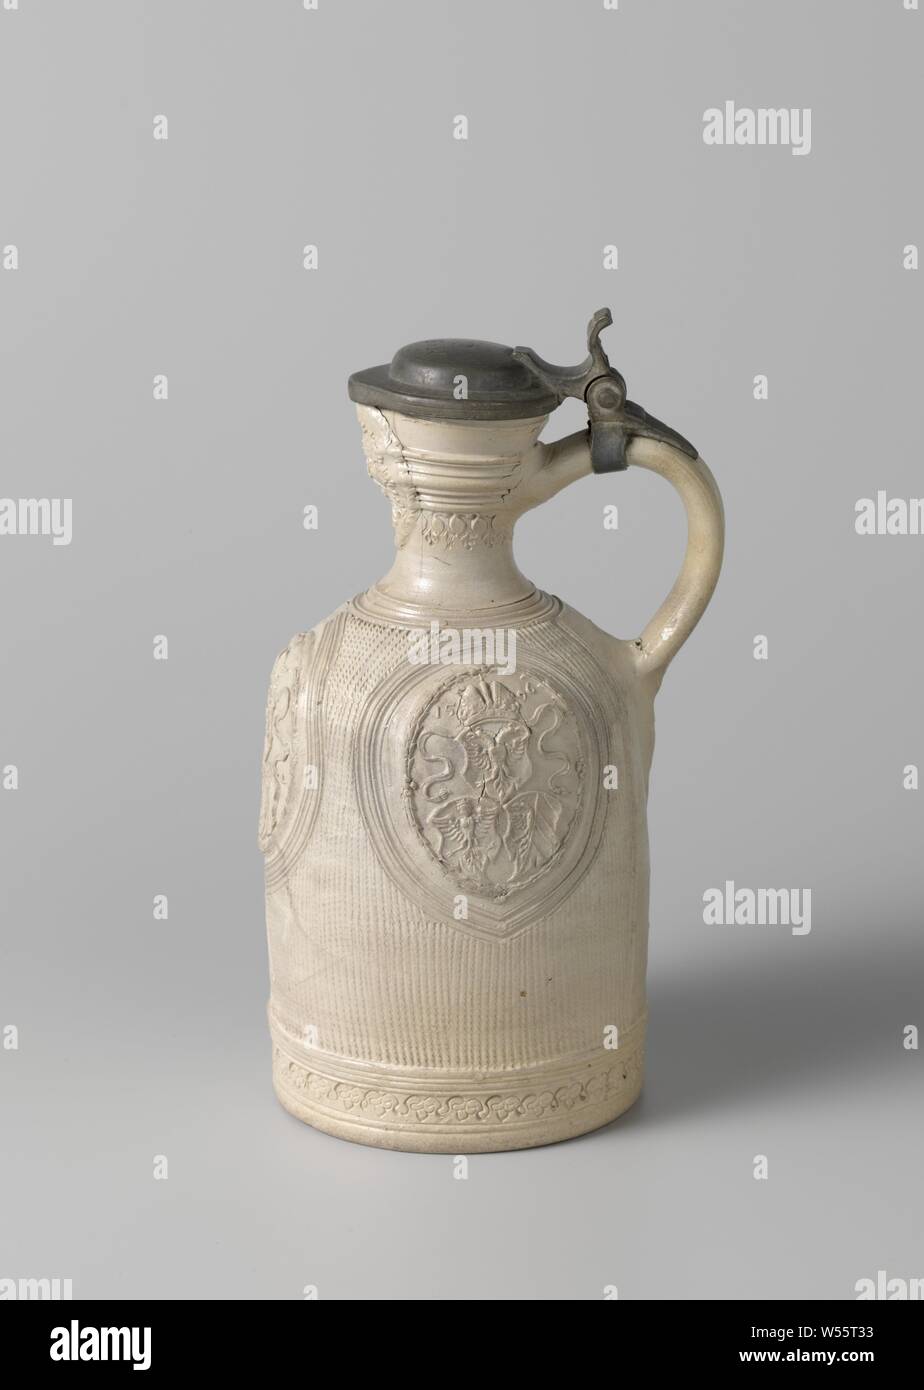 Jug with three coats of arms in medallions, Stoneware jug on a stand surface with a cylindrical body, round shoulder and narrow neck with pinched spout. The C-shaped ear is attached to the neck and shoulder. Profiles on the neck, shoulder and abdomen. The belly is covered with horizontally incised lines. Three times a engraved medallion with a printed and imposed medallion with three weapons (State Coat of Arms, family crest Von Merlan and the coat of arms of the city of Nuremberg) and the date '1596' were saved. Just above the foot a stamped band with leaf motifs. A mask embossed on the neck Stock Photo